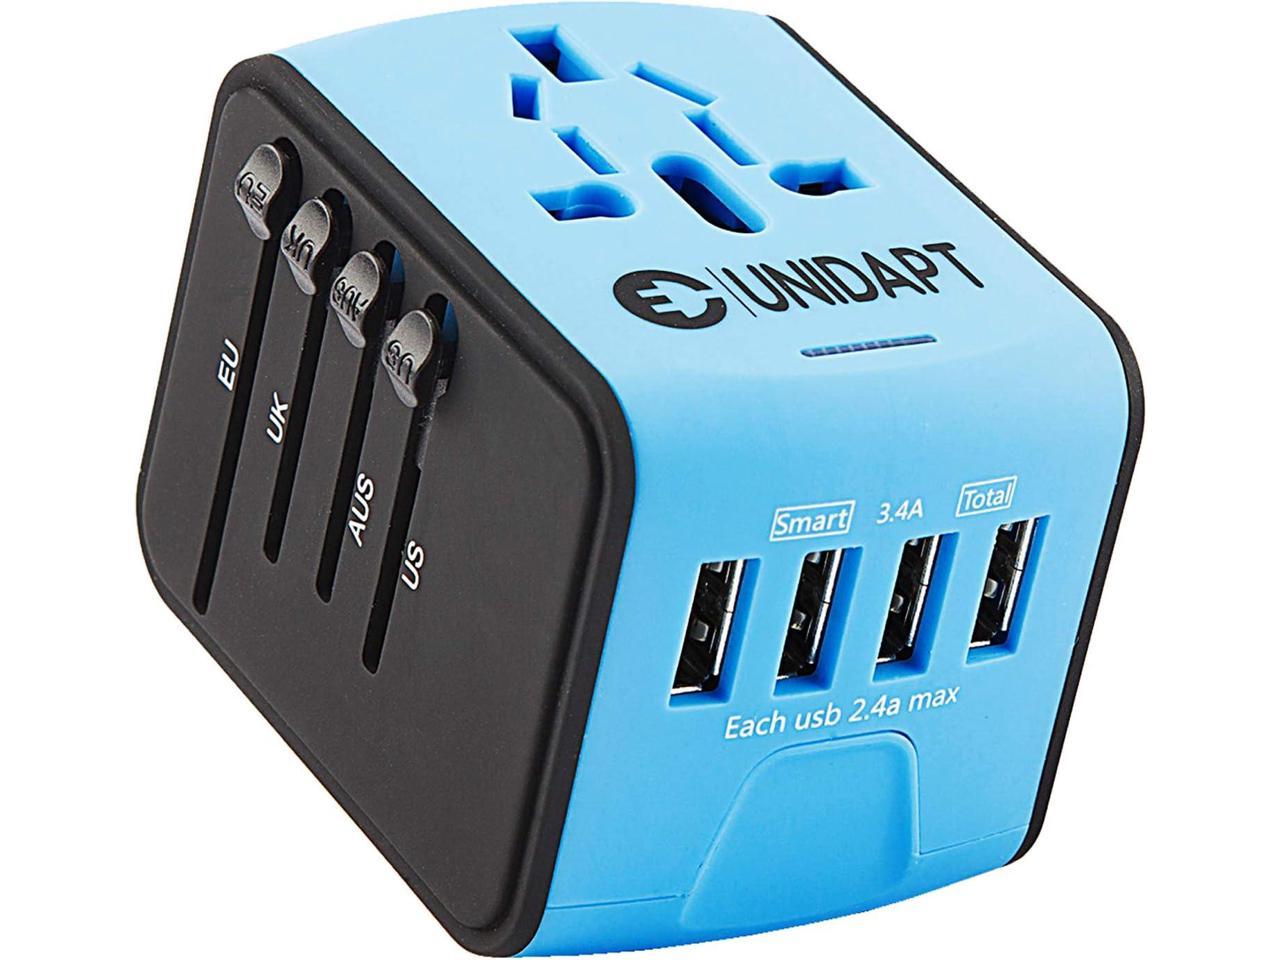 US Europe & Asia Built-in Spare Fuse,Great for iPhone/iPad/Samsung/Smartphone BLUE Good voice International Travel Power Adapter with 2.4A Dual USB Charger for UK AU Green 